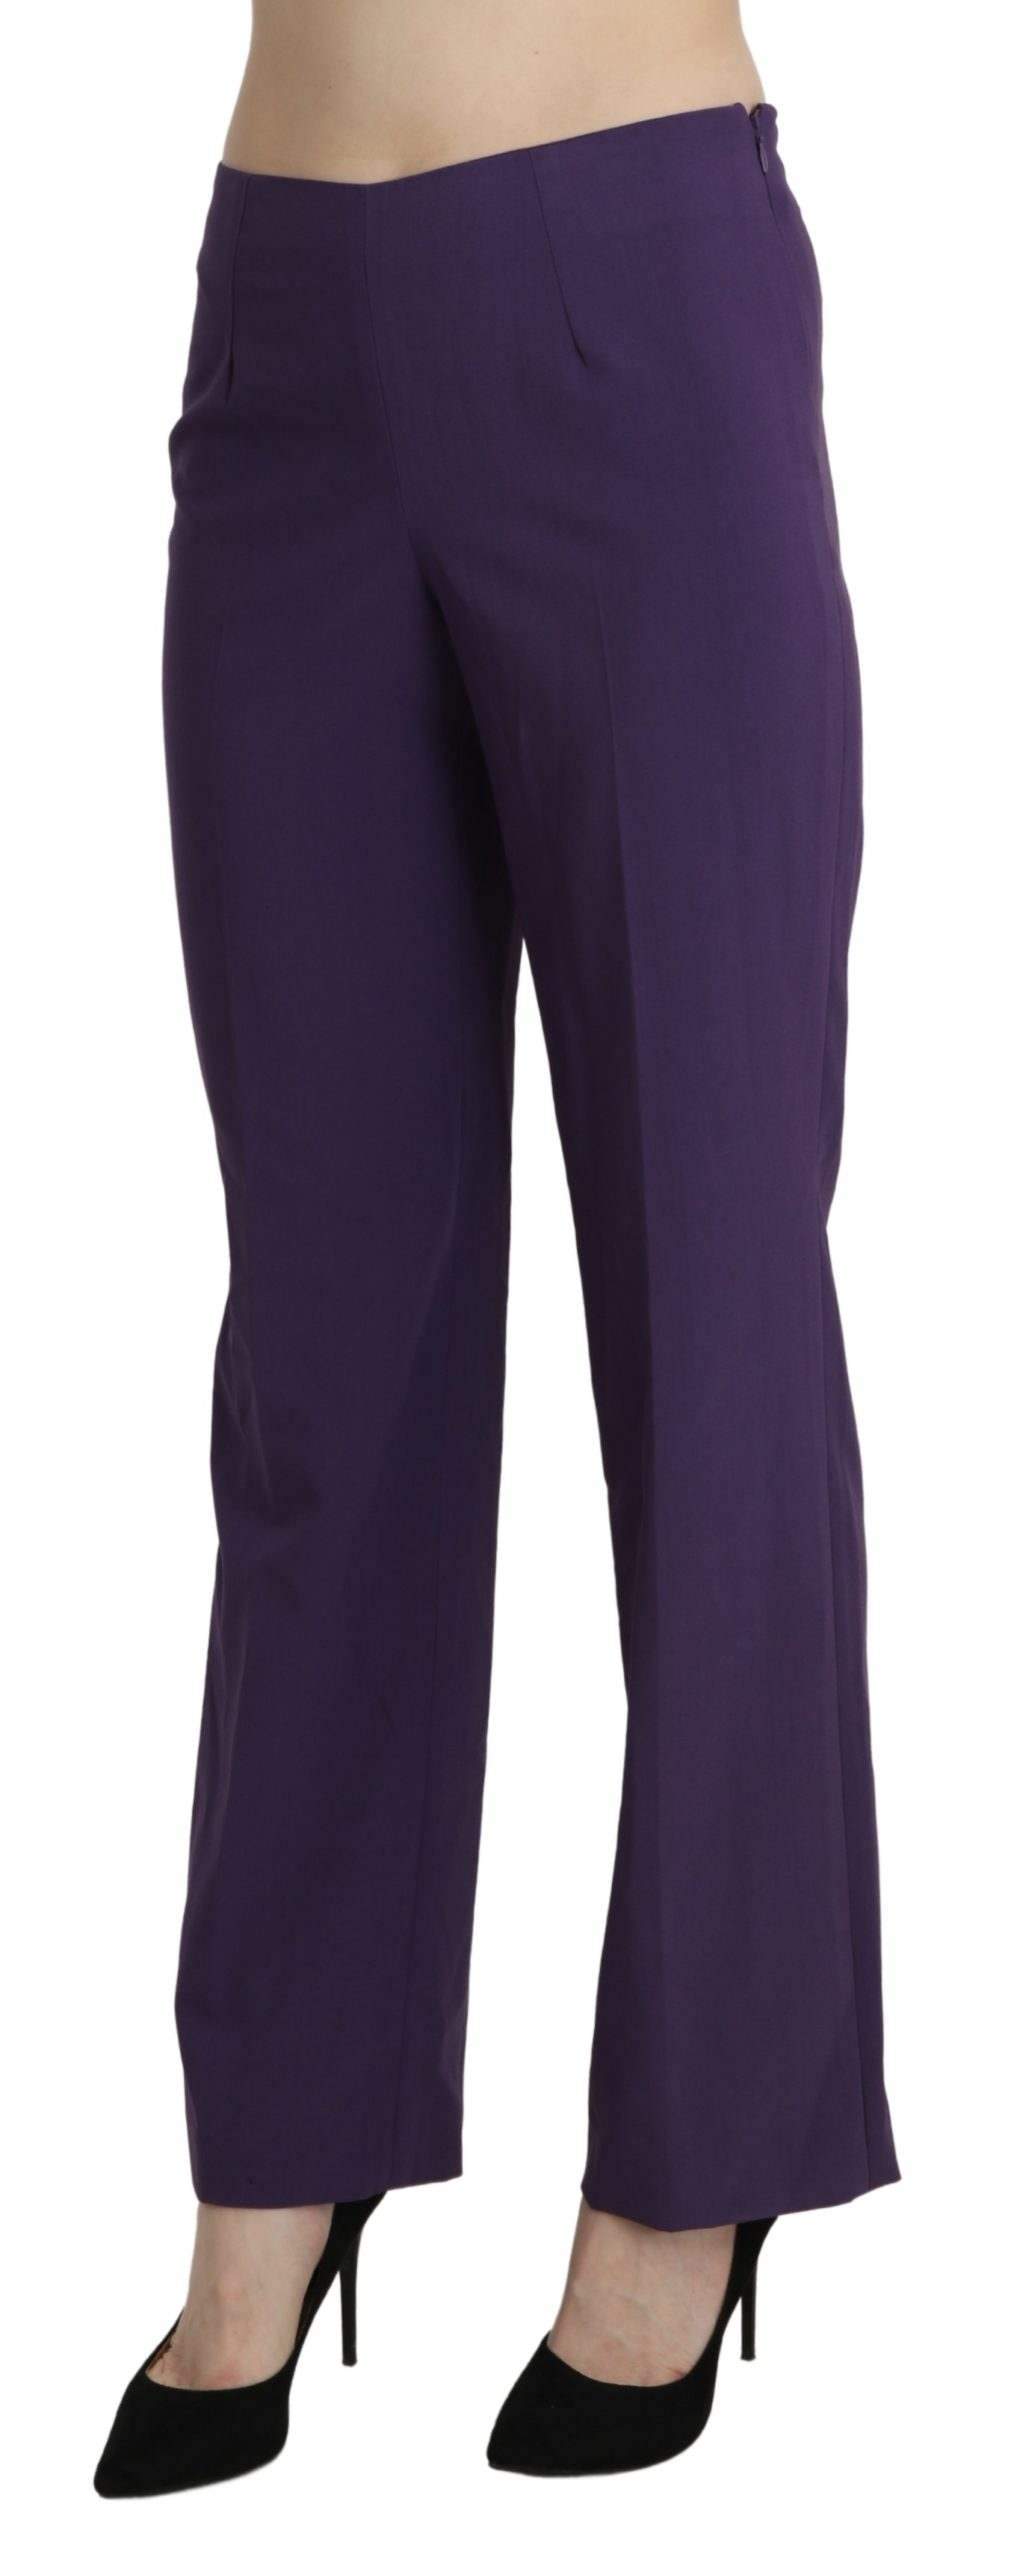 BENCIVENGA Purple High Waist Straight Dress Trouser Pants #women, BENCIVENGA, feed-agegroup-adult, feed-color-violet, feed-gender-female, feed-size-IT42|M, Gender_Women, IT42|M, Jeans & Pants - Women - Clothing, Violet, Women - New Arrivals at SEYMAYKA